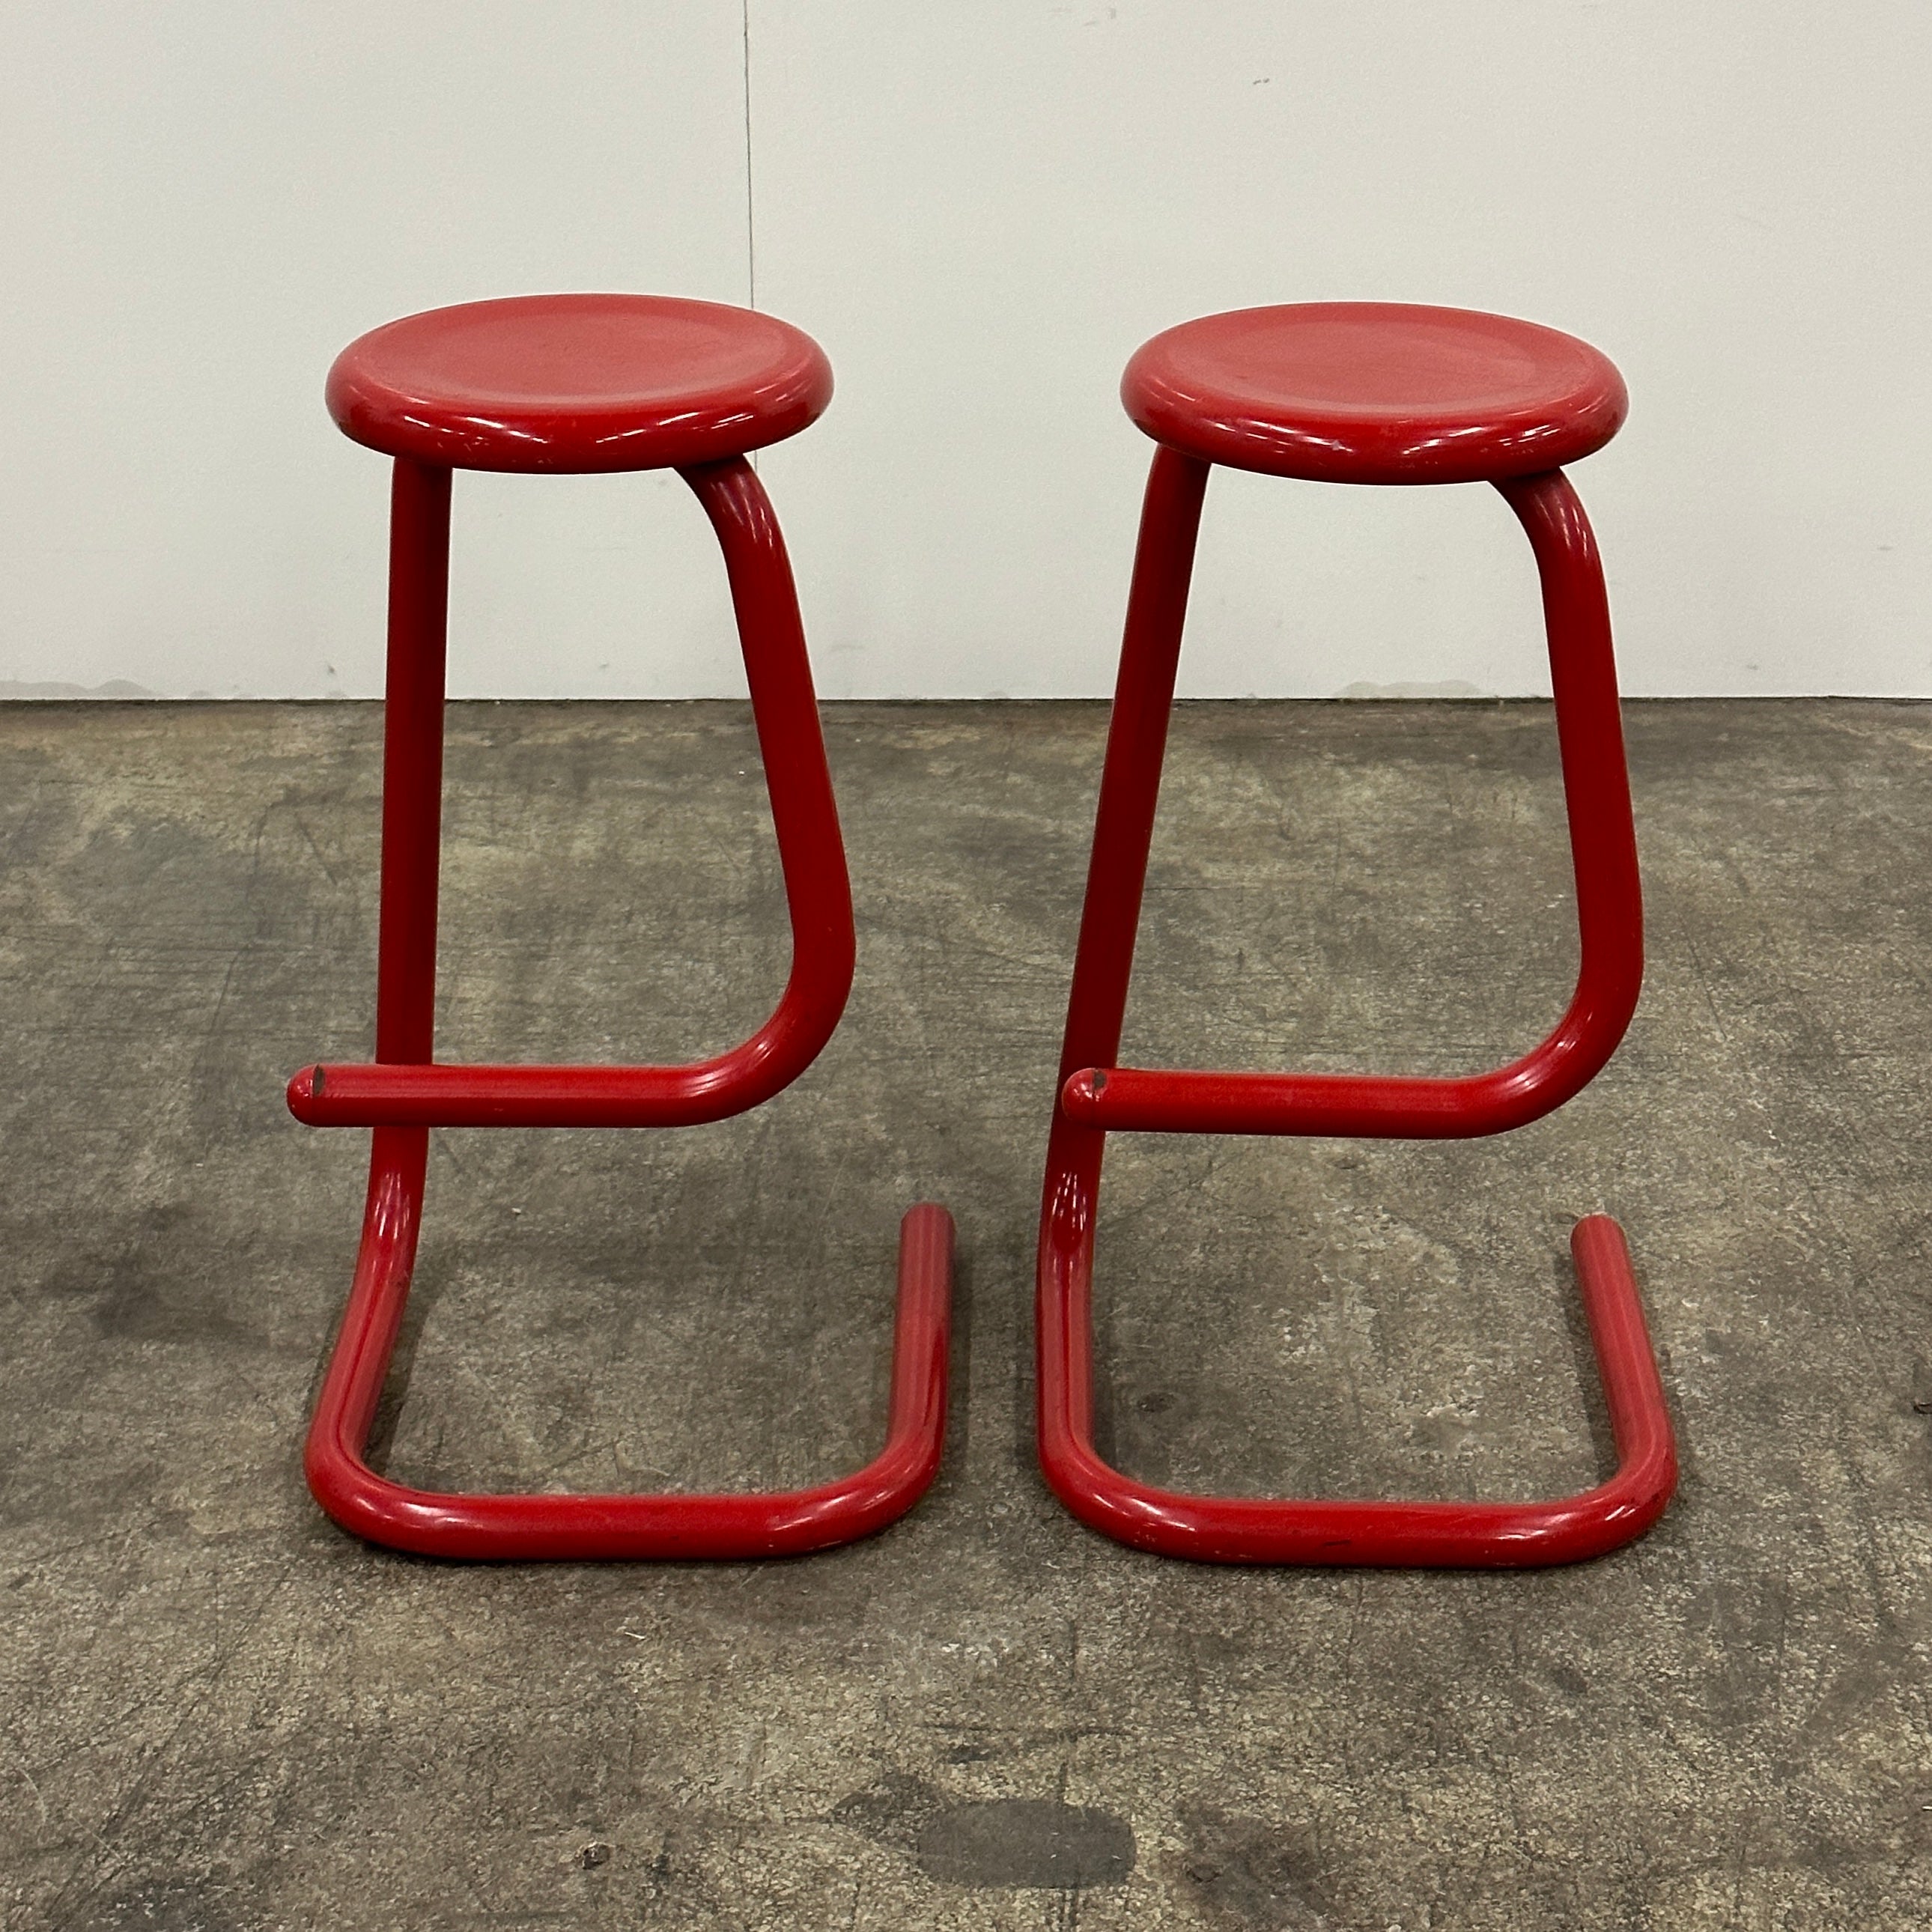 Paperclip Stools by Kinetics